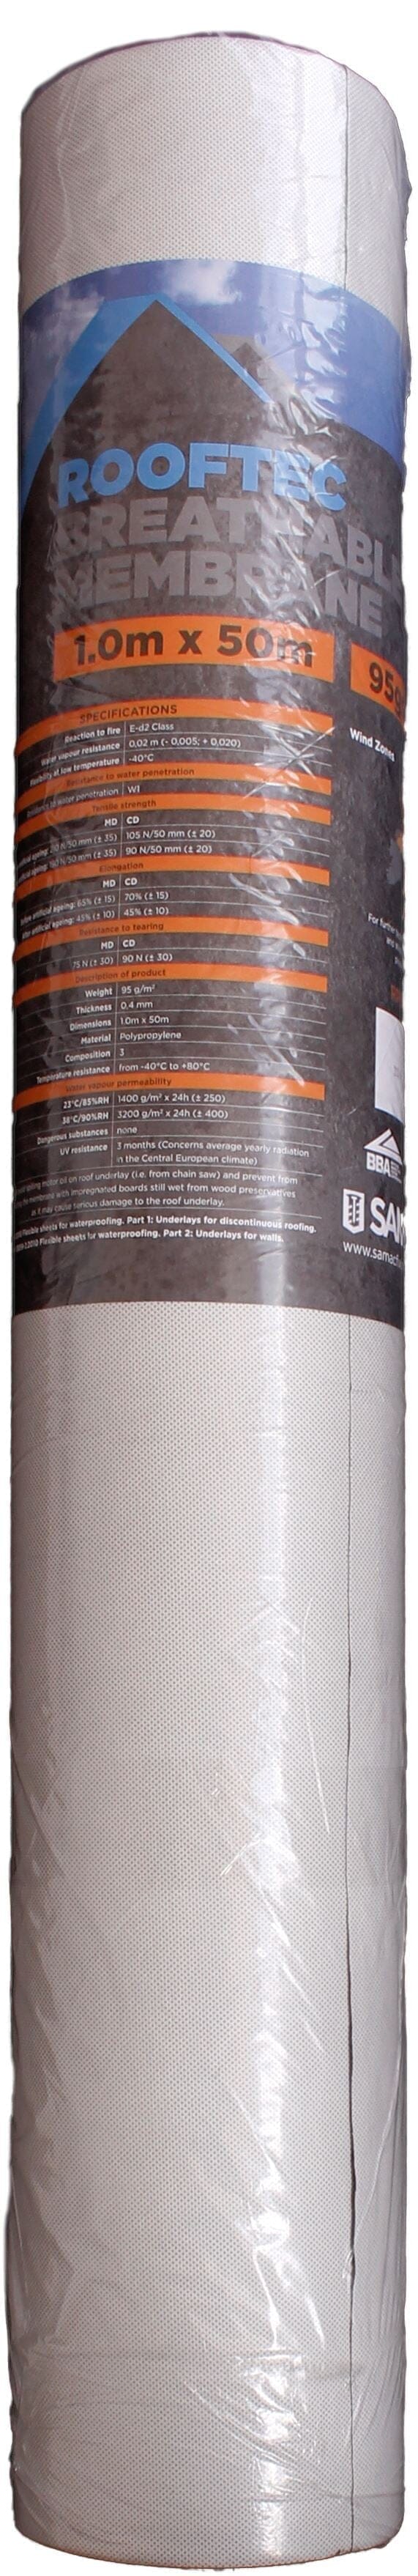 Rooftec Breathable Membrane 95 gsm - Roofing Supplies UK